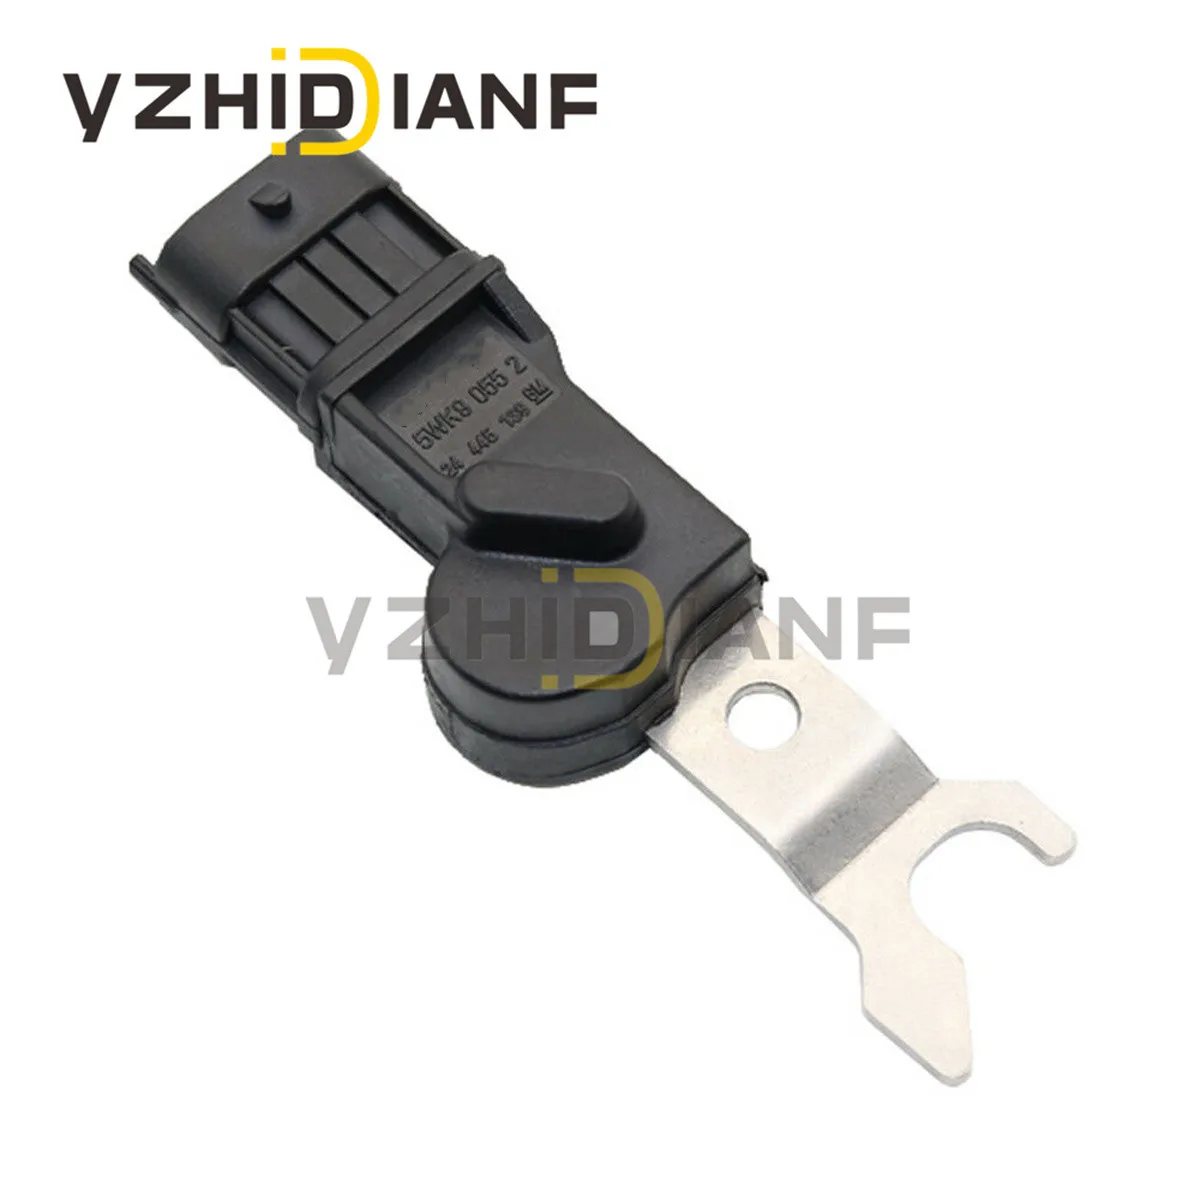 

1x Engine Camshaft Position Sensor For VAUXHALL OPEL ASTRA F CALIBRA A OMEGA B VECTRA B Holden 1.8 90458252 1238915 5WK90551Z